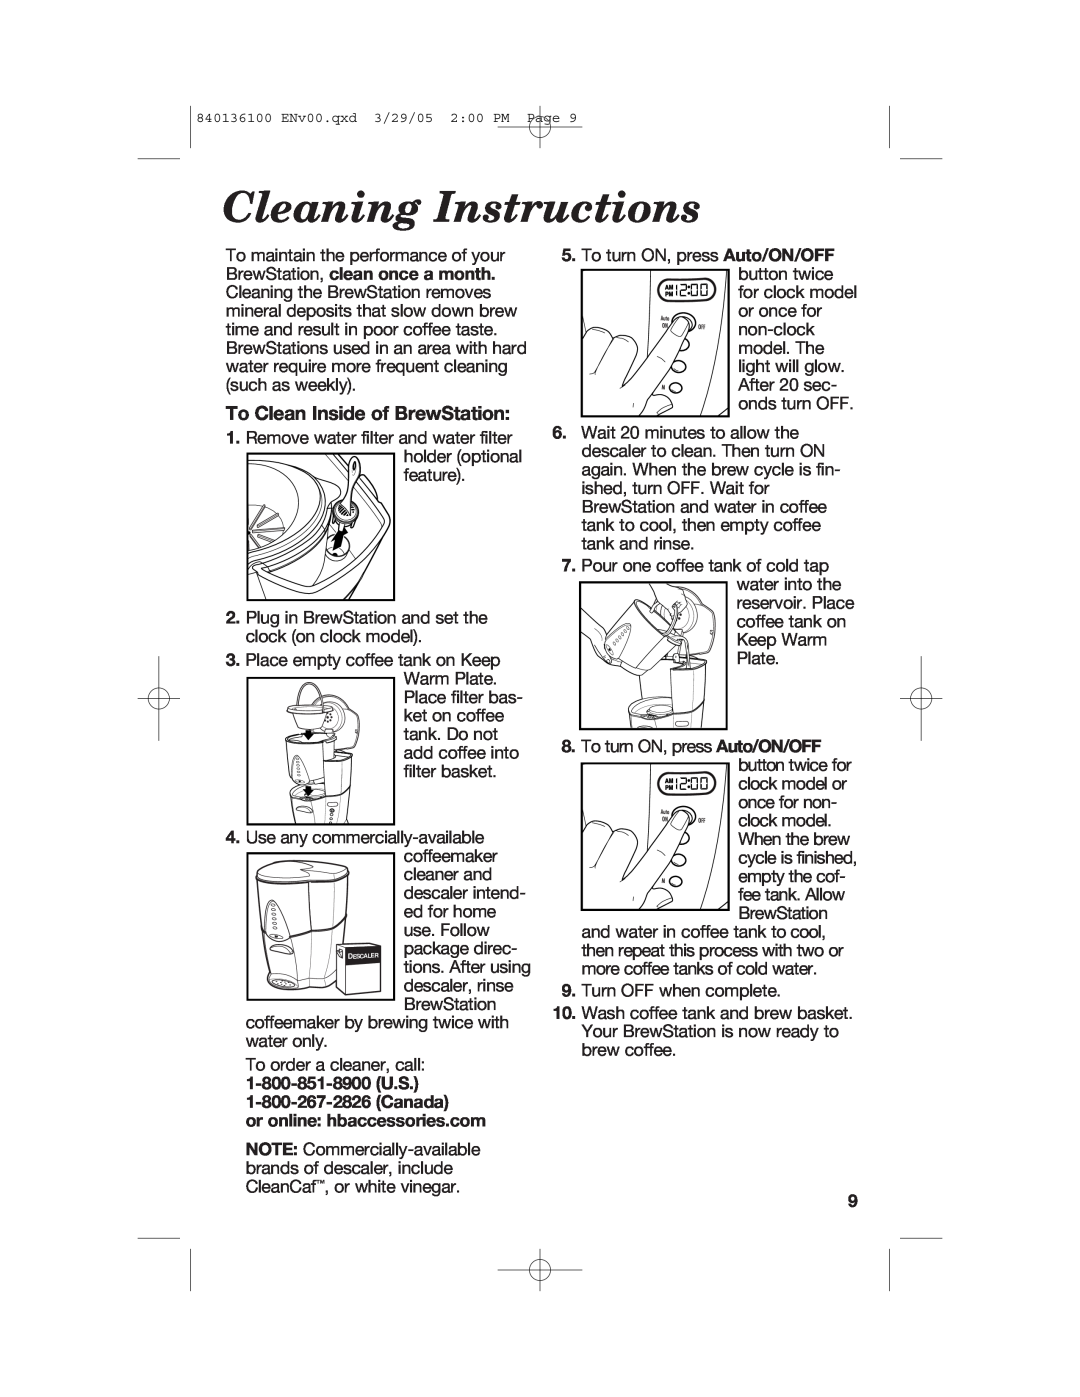 Hamilton Beach 840136100 manual Cleaning Instructions, To Clean Inside of BrewStation, or online hbaccessories.com 